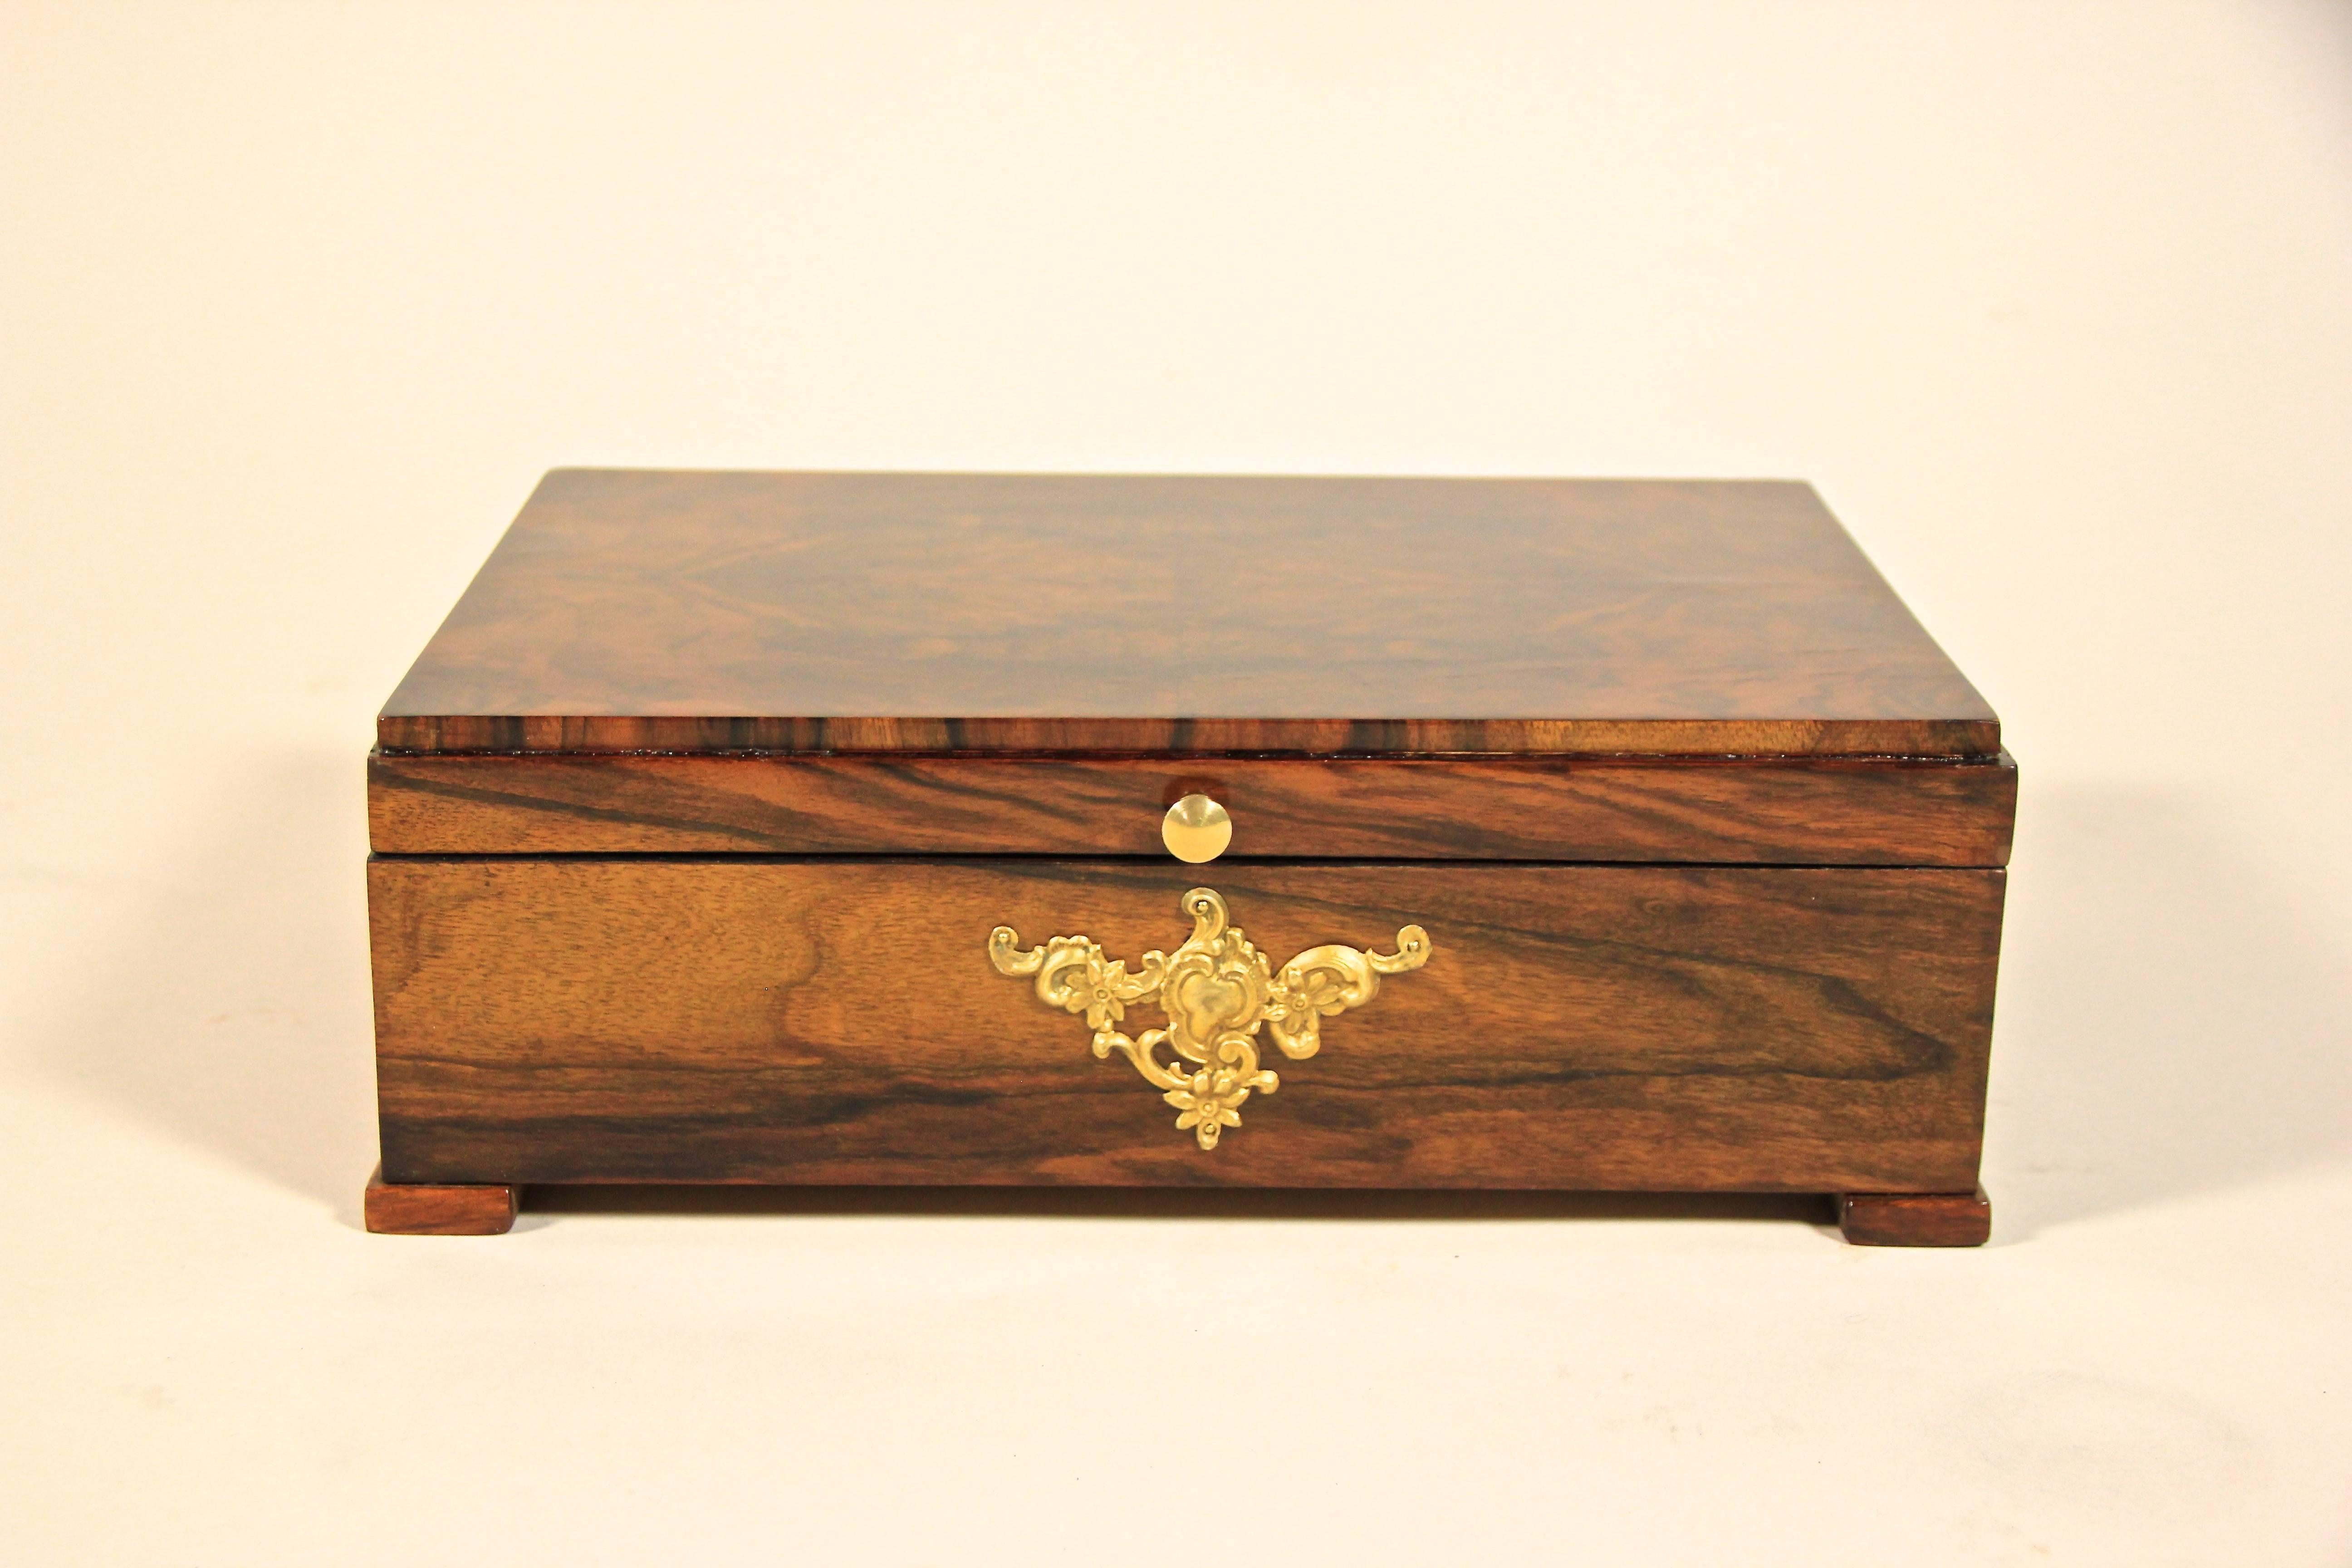 Dreamlike wooden box from the early Austrian Art Nouveau era, circa 1900. Showing an amazing veneer work with mirror matched walnut wood on top - this decorative box with a removable compartment can be used for many things. The ornate shaped brass